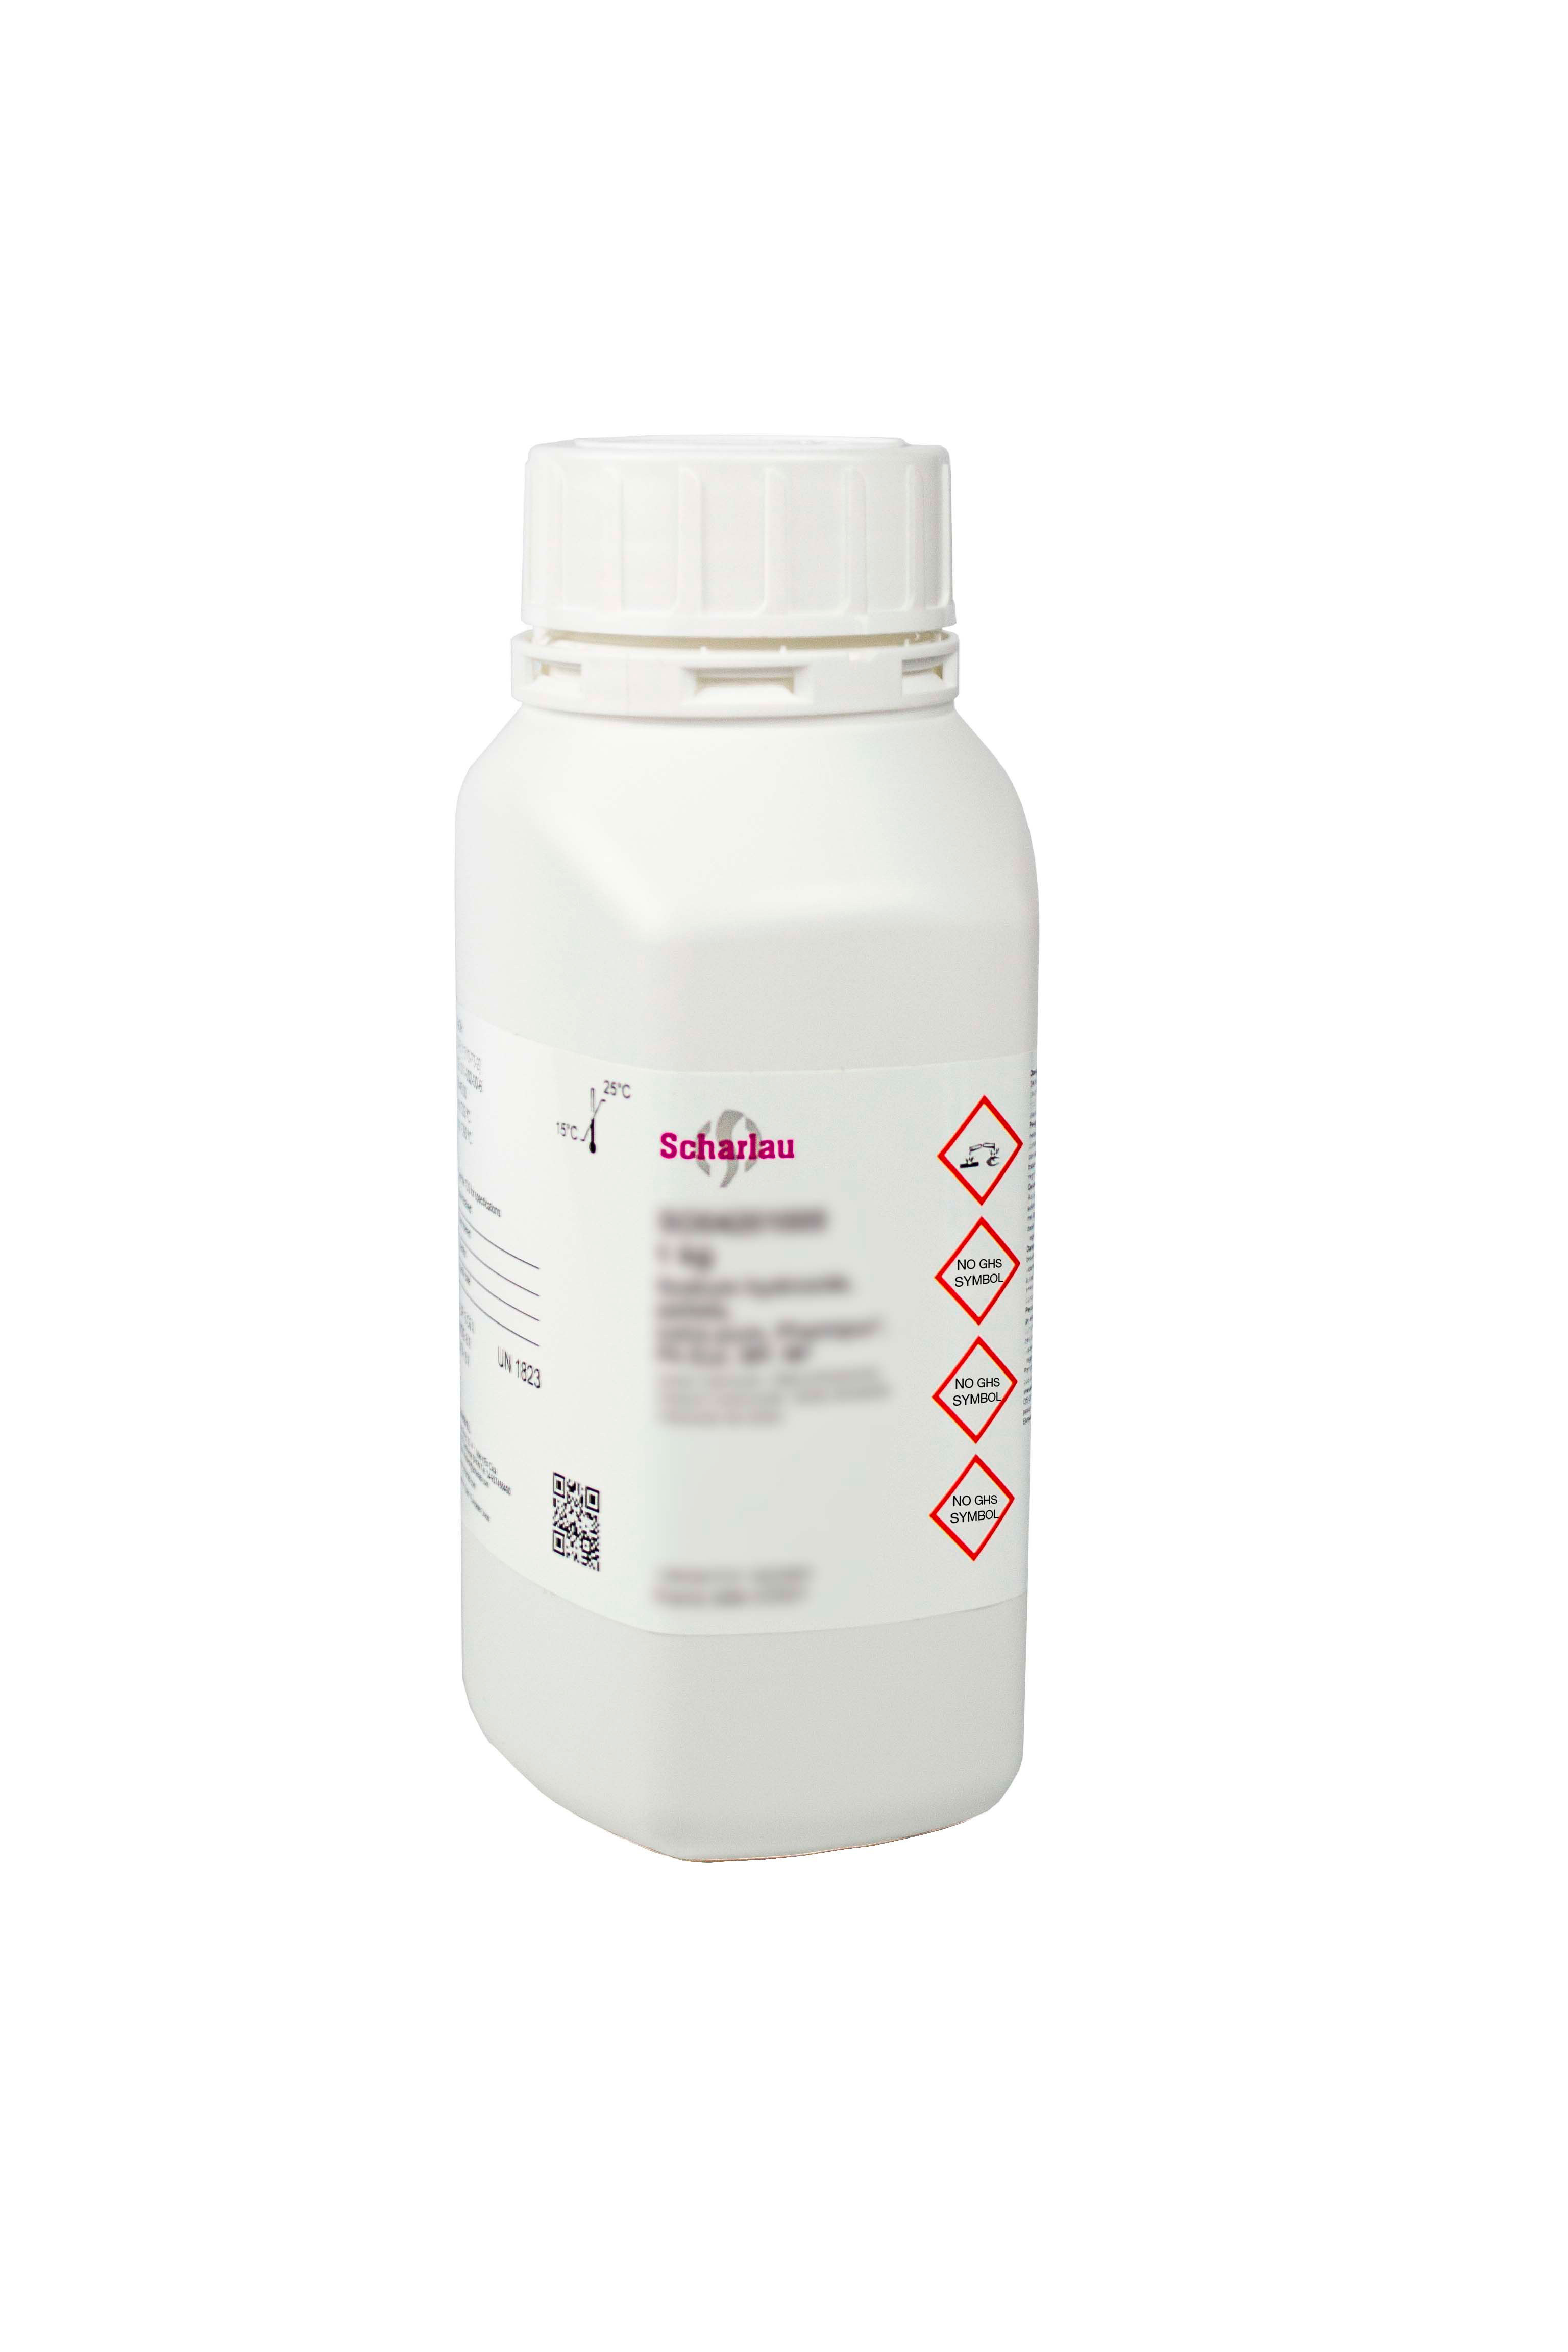 Calcium sulfate dihydrate, for analysis, ExpertQ®, ACS